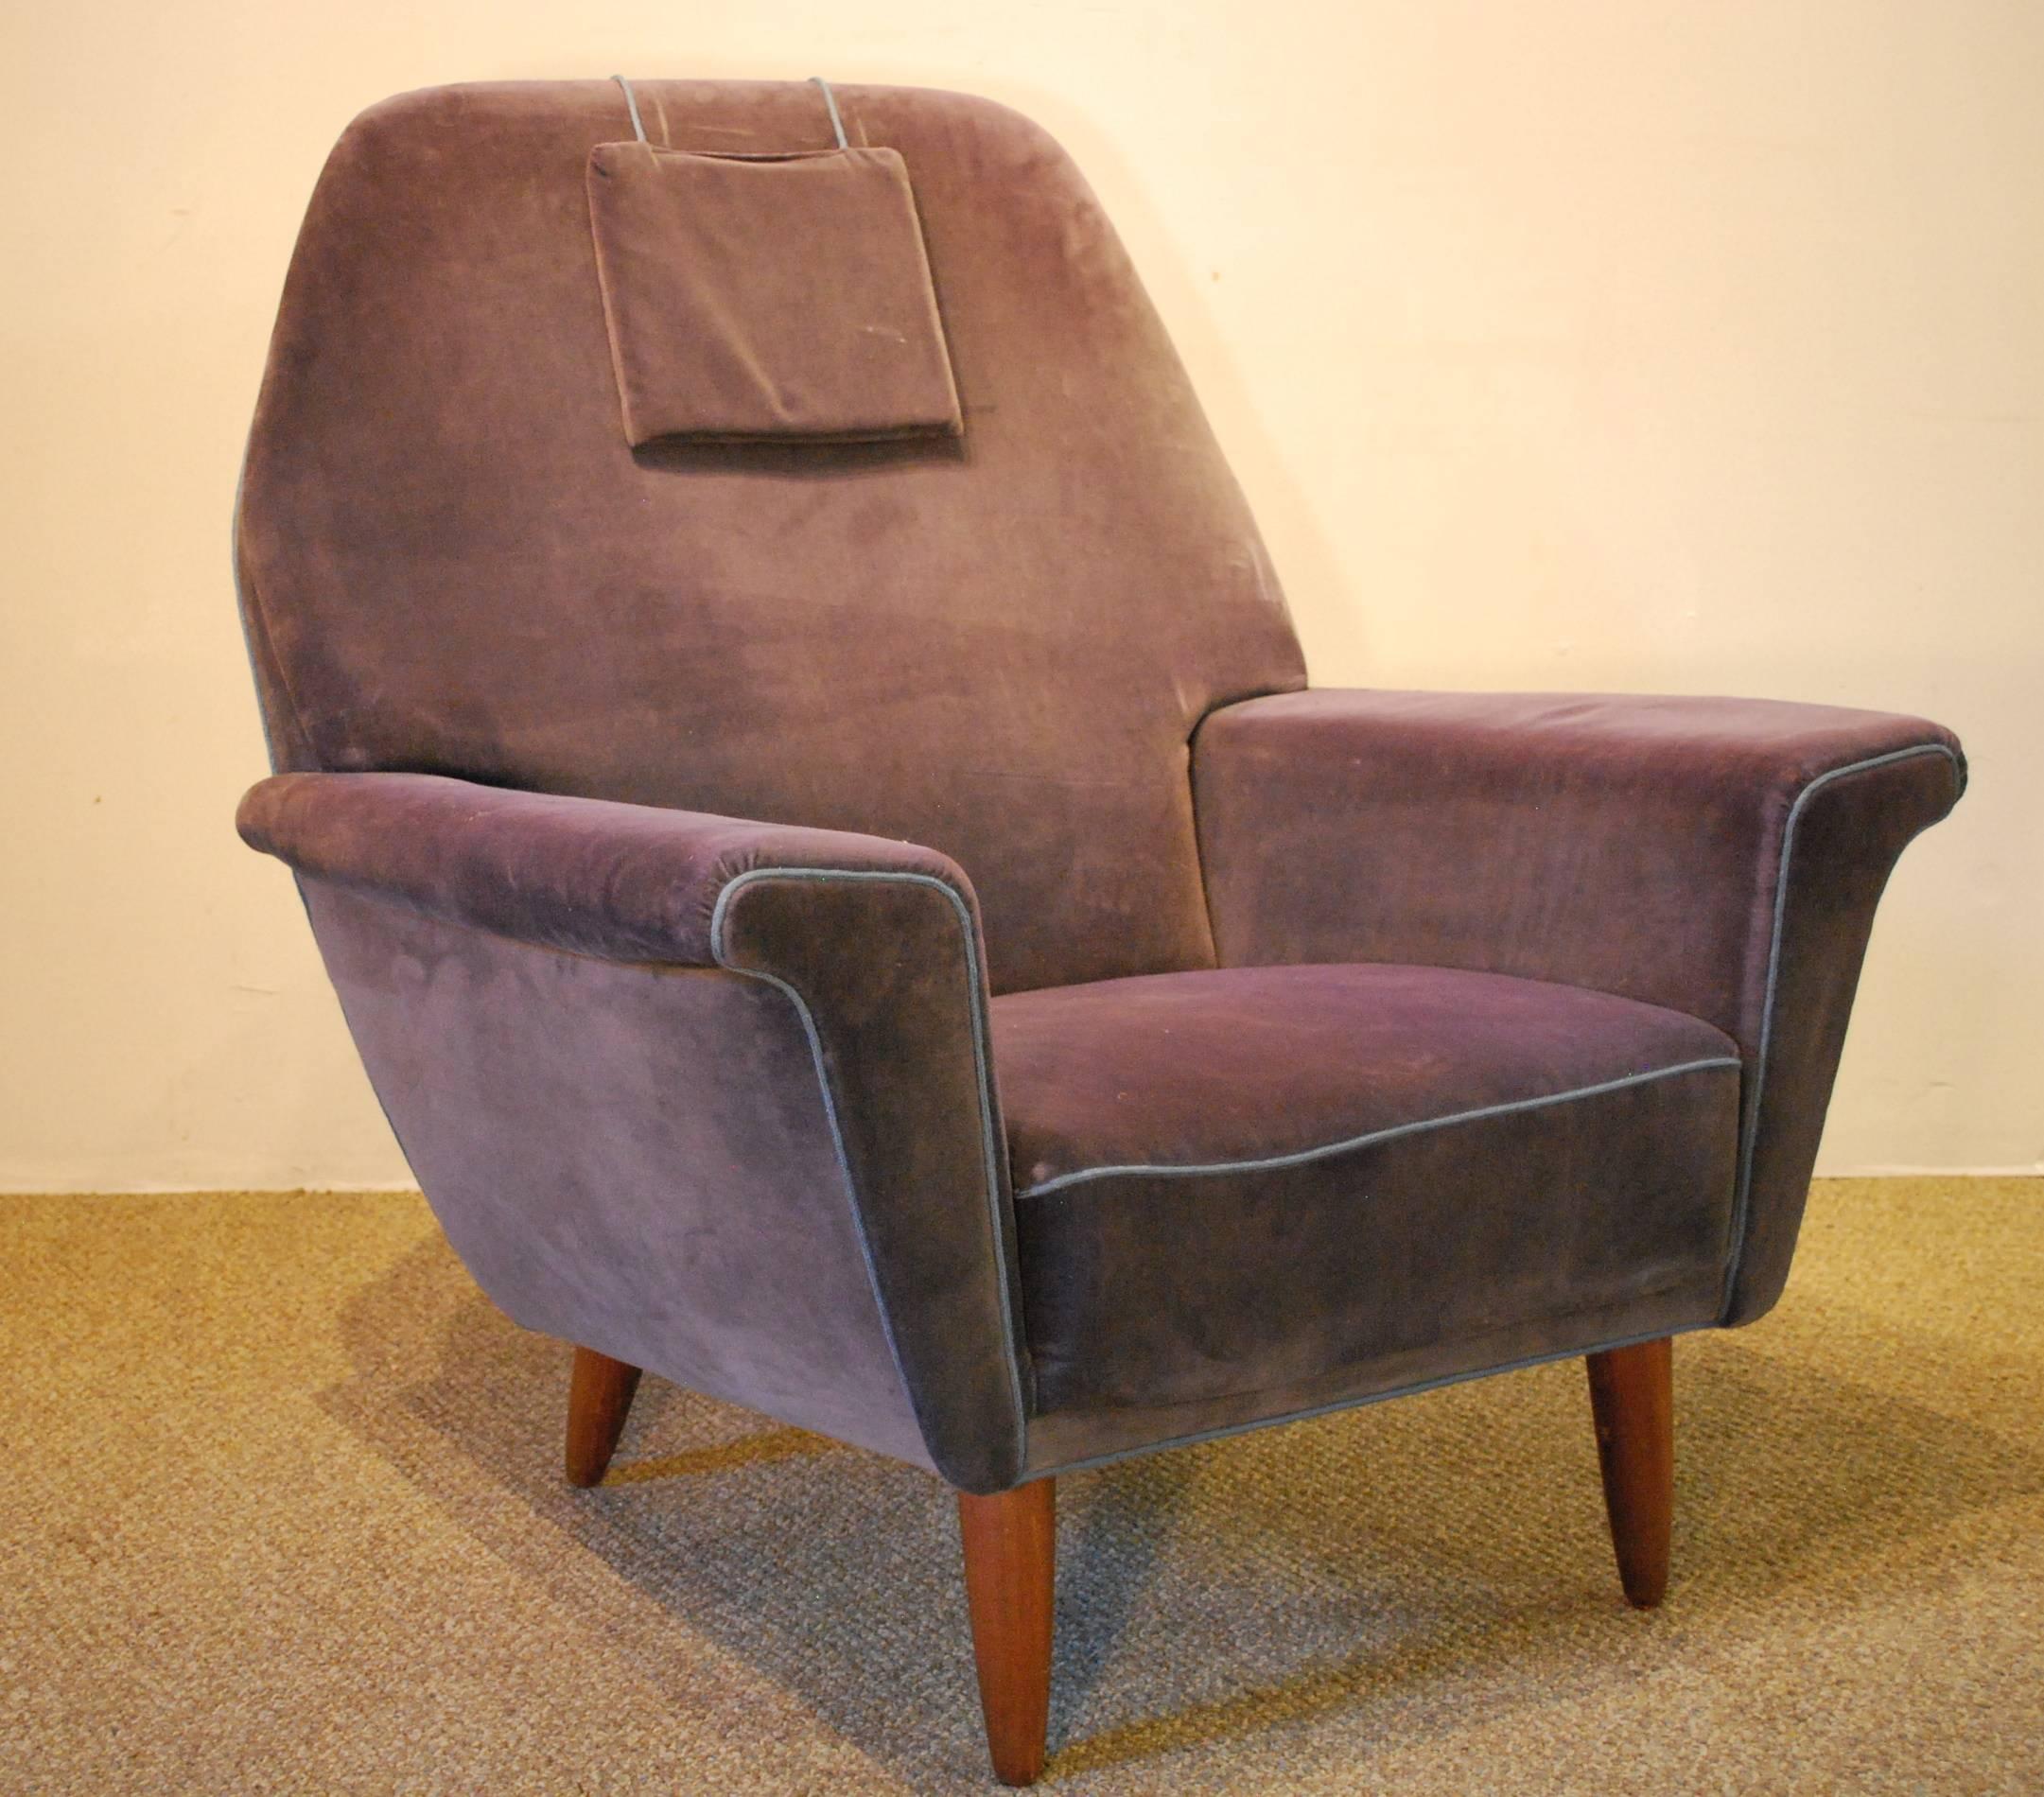 A Danish Mid-Century Modern wingback armchair upholstered in a soft gray/blue velvet fabric with matching piping and an attached head pillow. This stylish chair is a partner to the matching sofa with the same classic Scandinavian design lines.